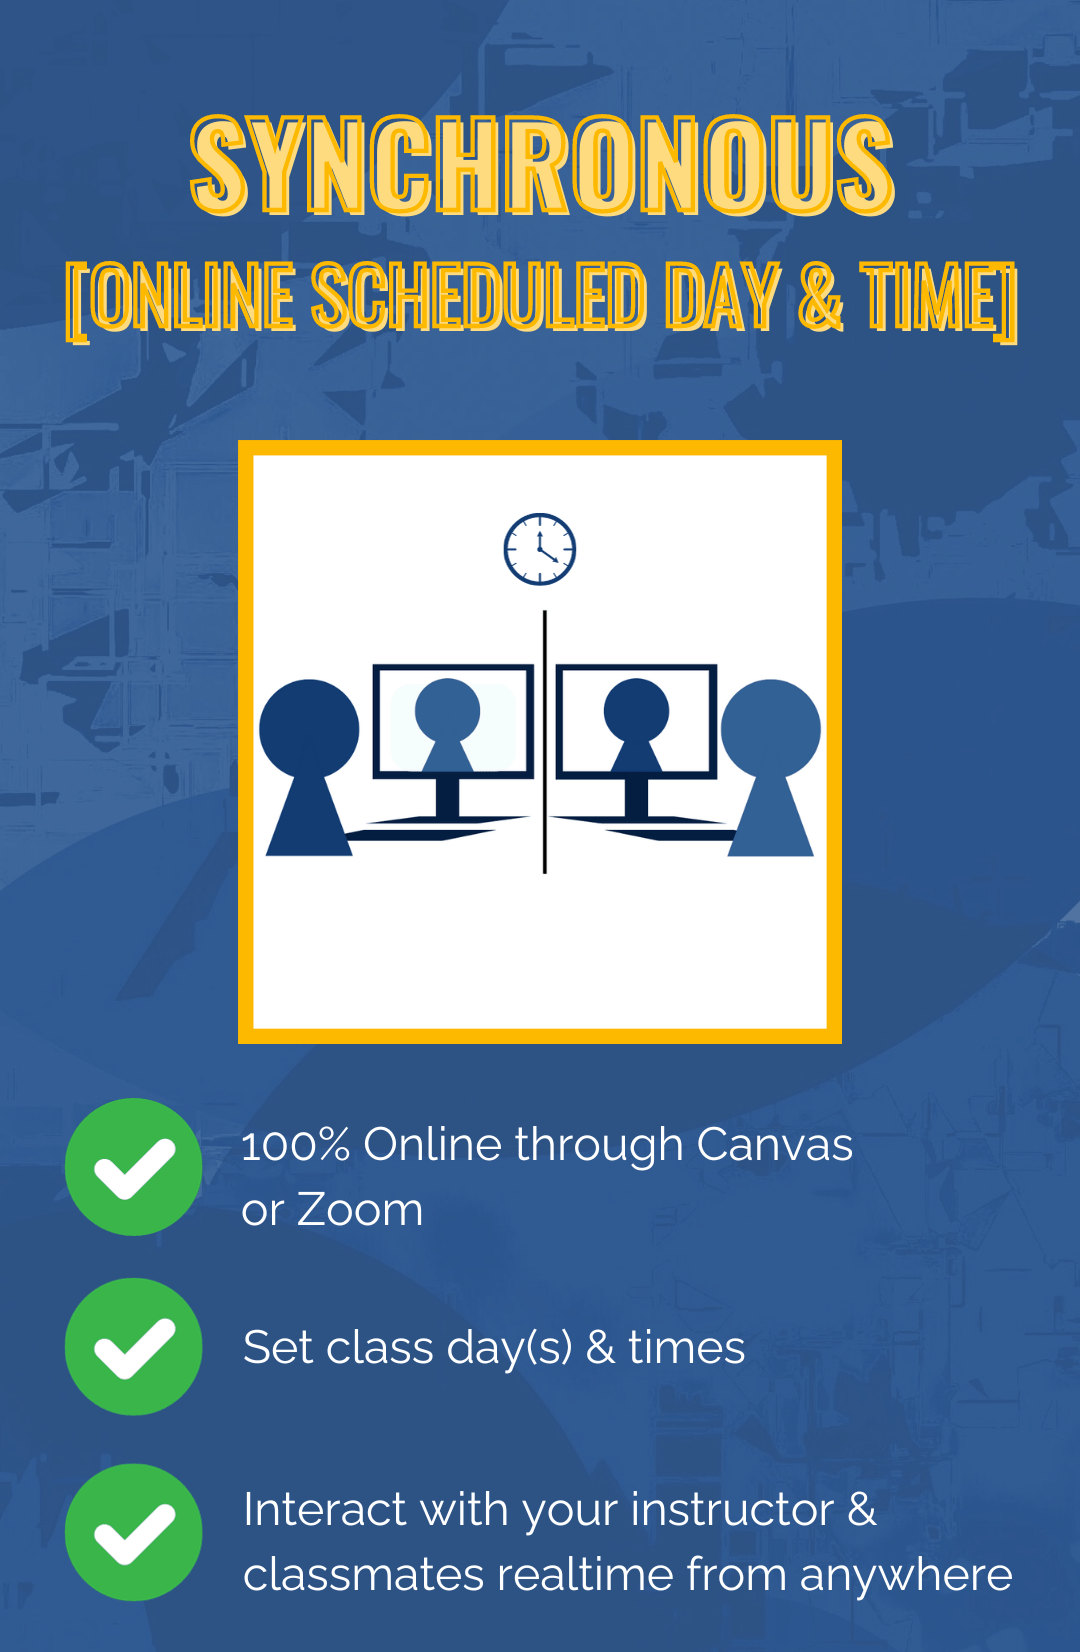 Graphic representation of Synchronous instruction highlighting that it is 100% online through Canvas and or Zoom with some required set days and times for online interaction between the student and either the instructor or other students or both. 